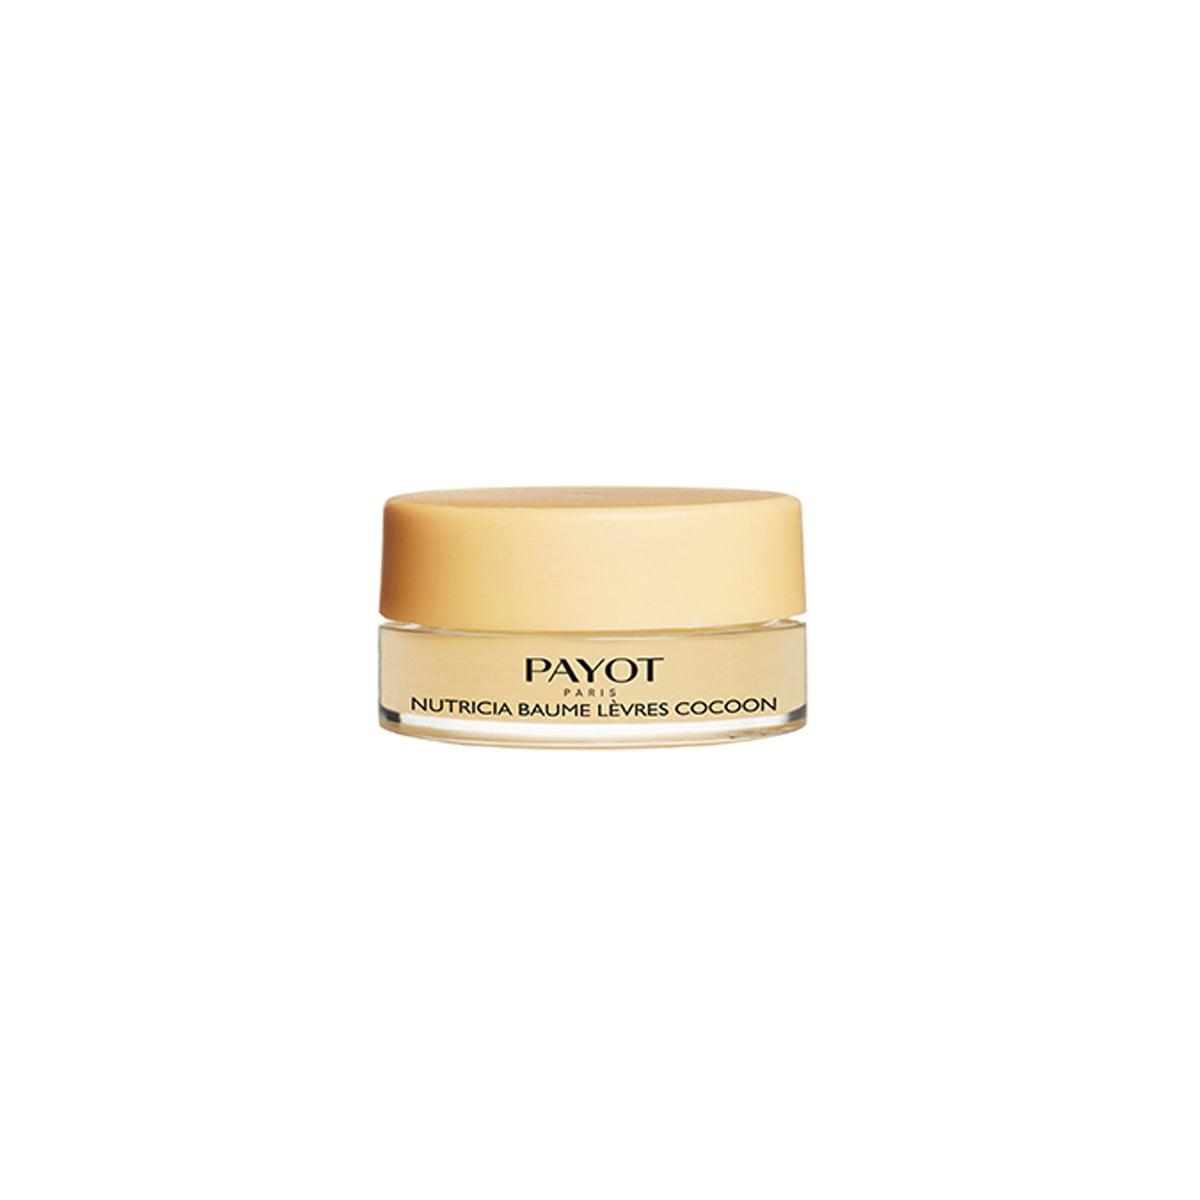 Payot Nutricia Baume Levres Cocoon 6g